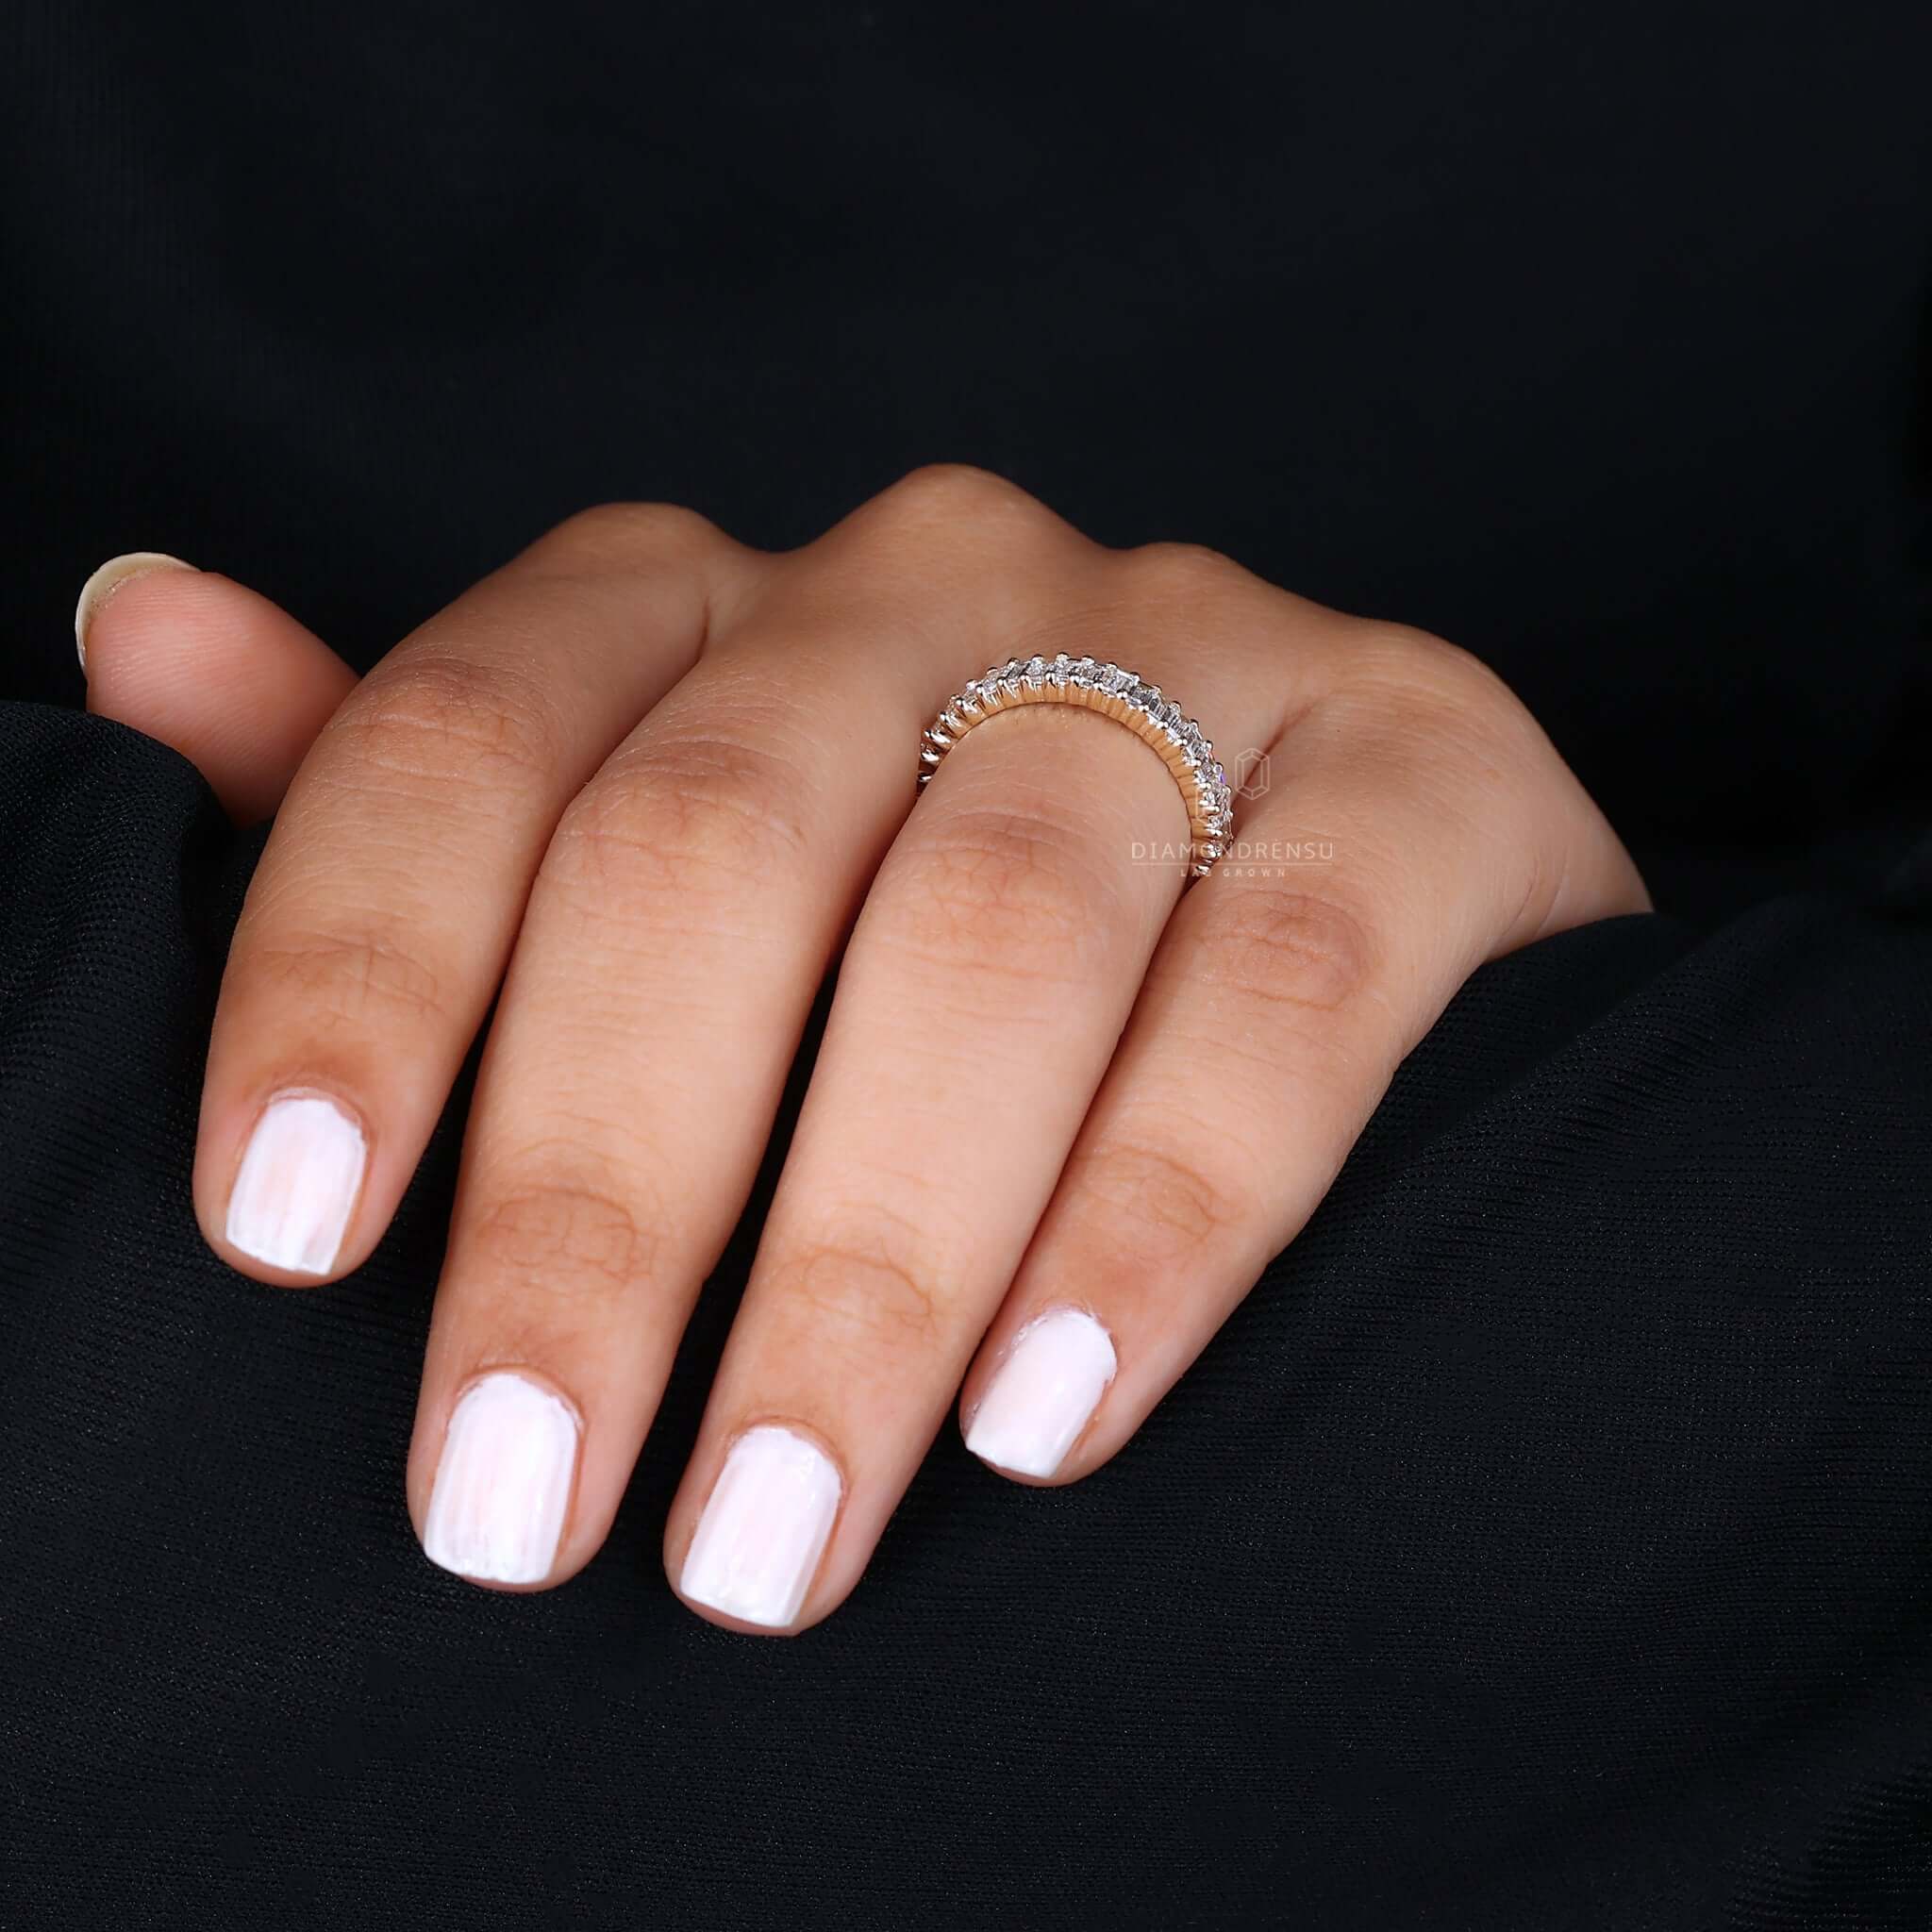 Woman's hand gracefully wearing a lab-grown diamond wedding band, showcasing its beauty and charm